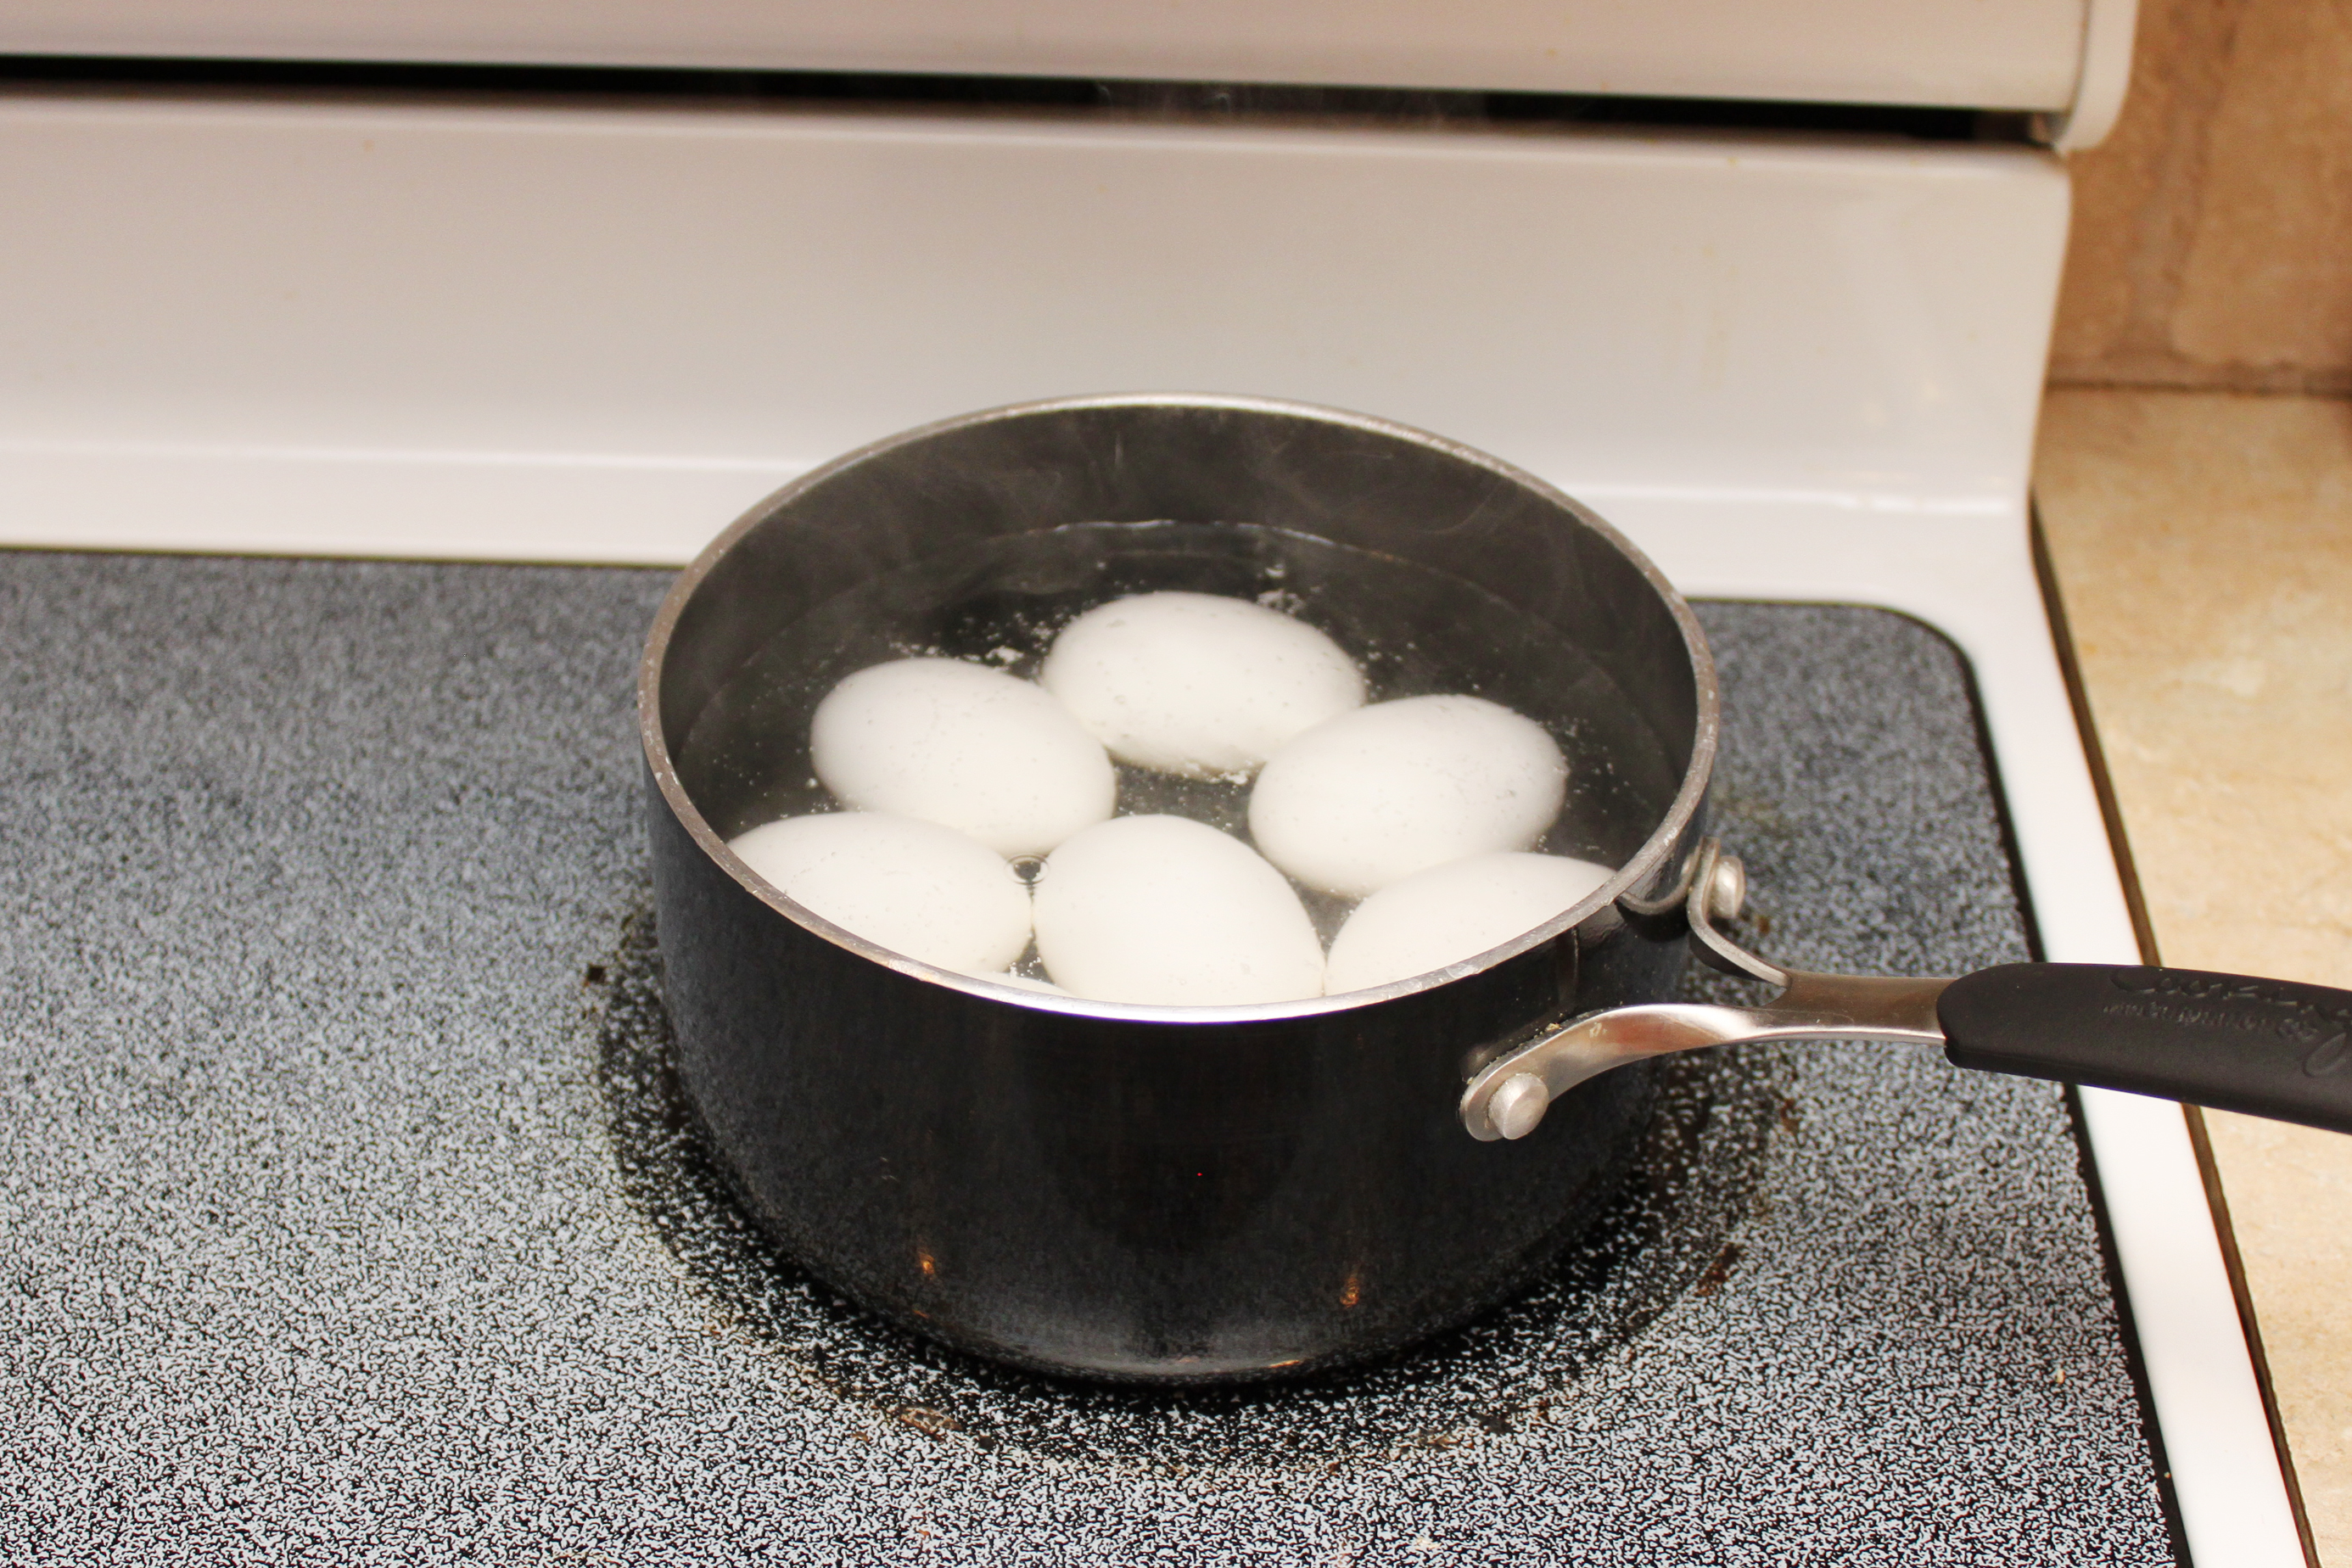 Eggs on a stove photo